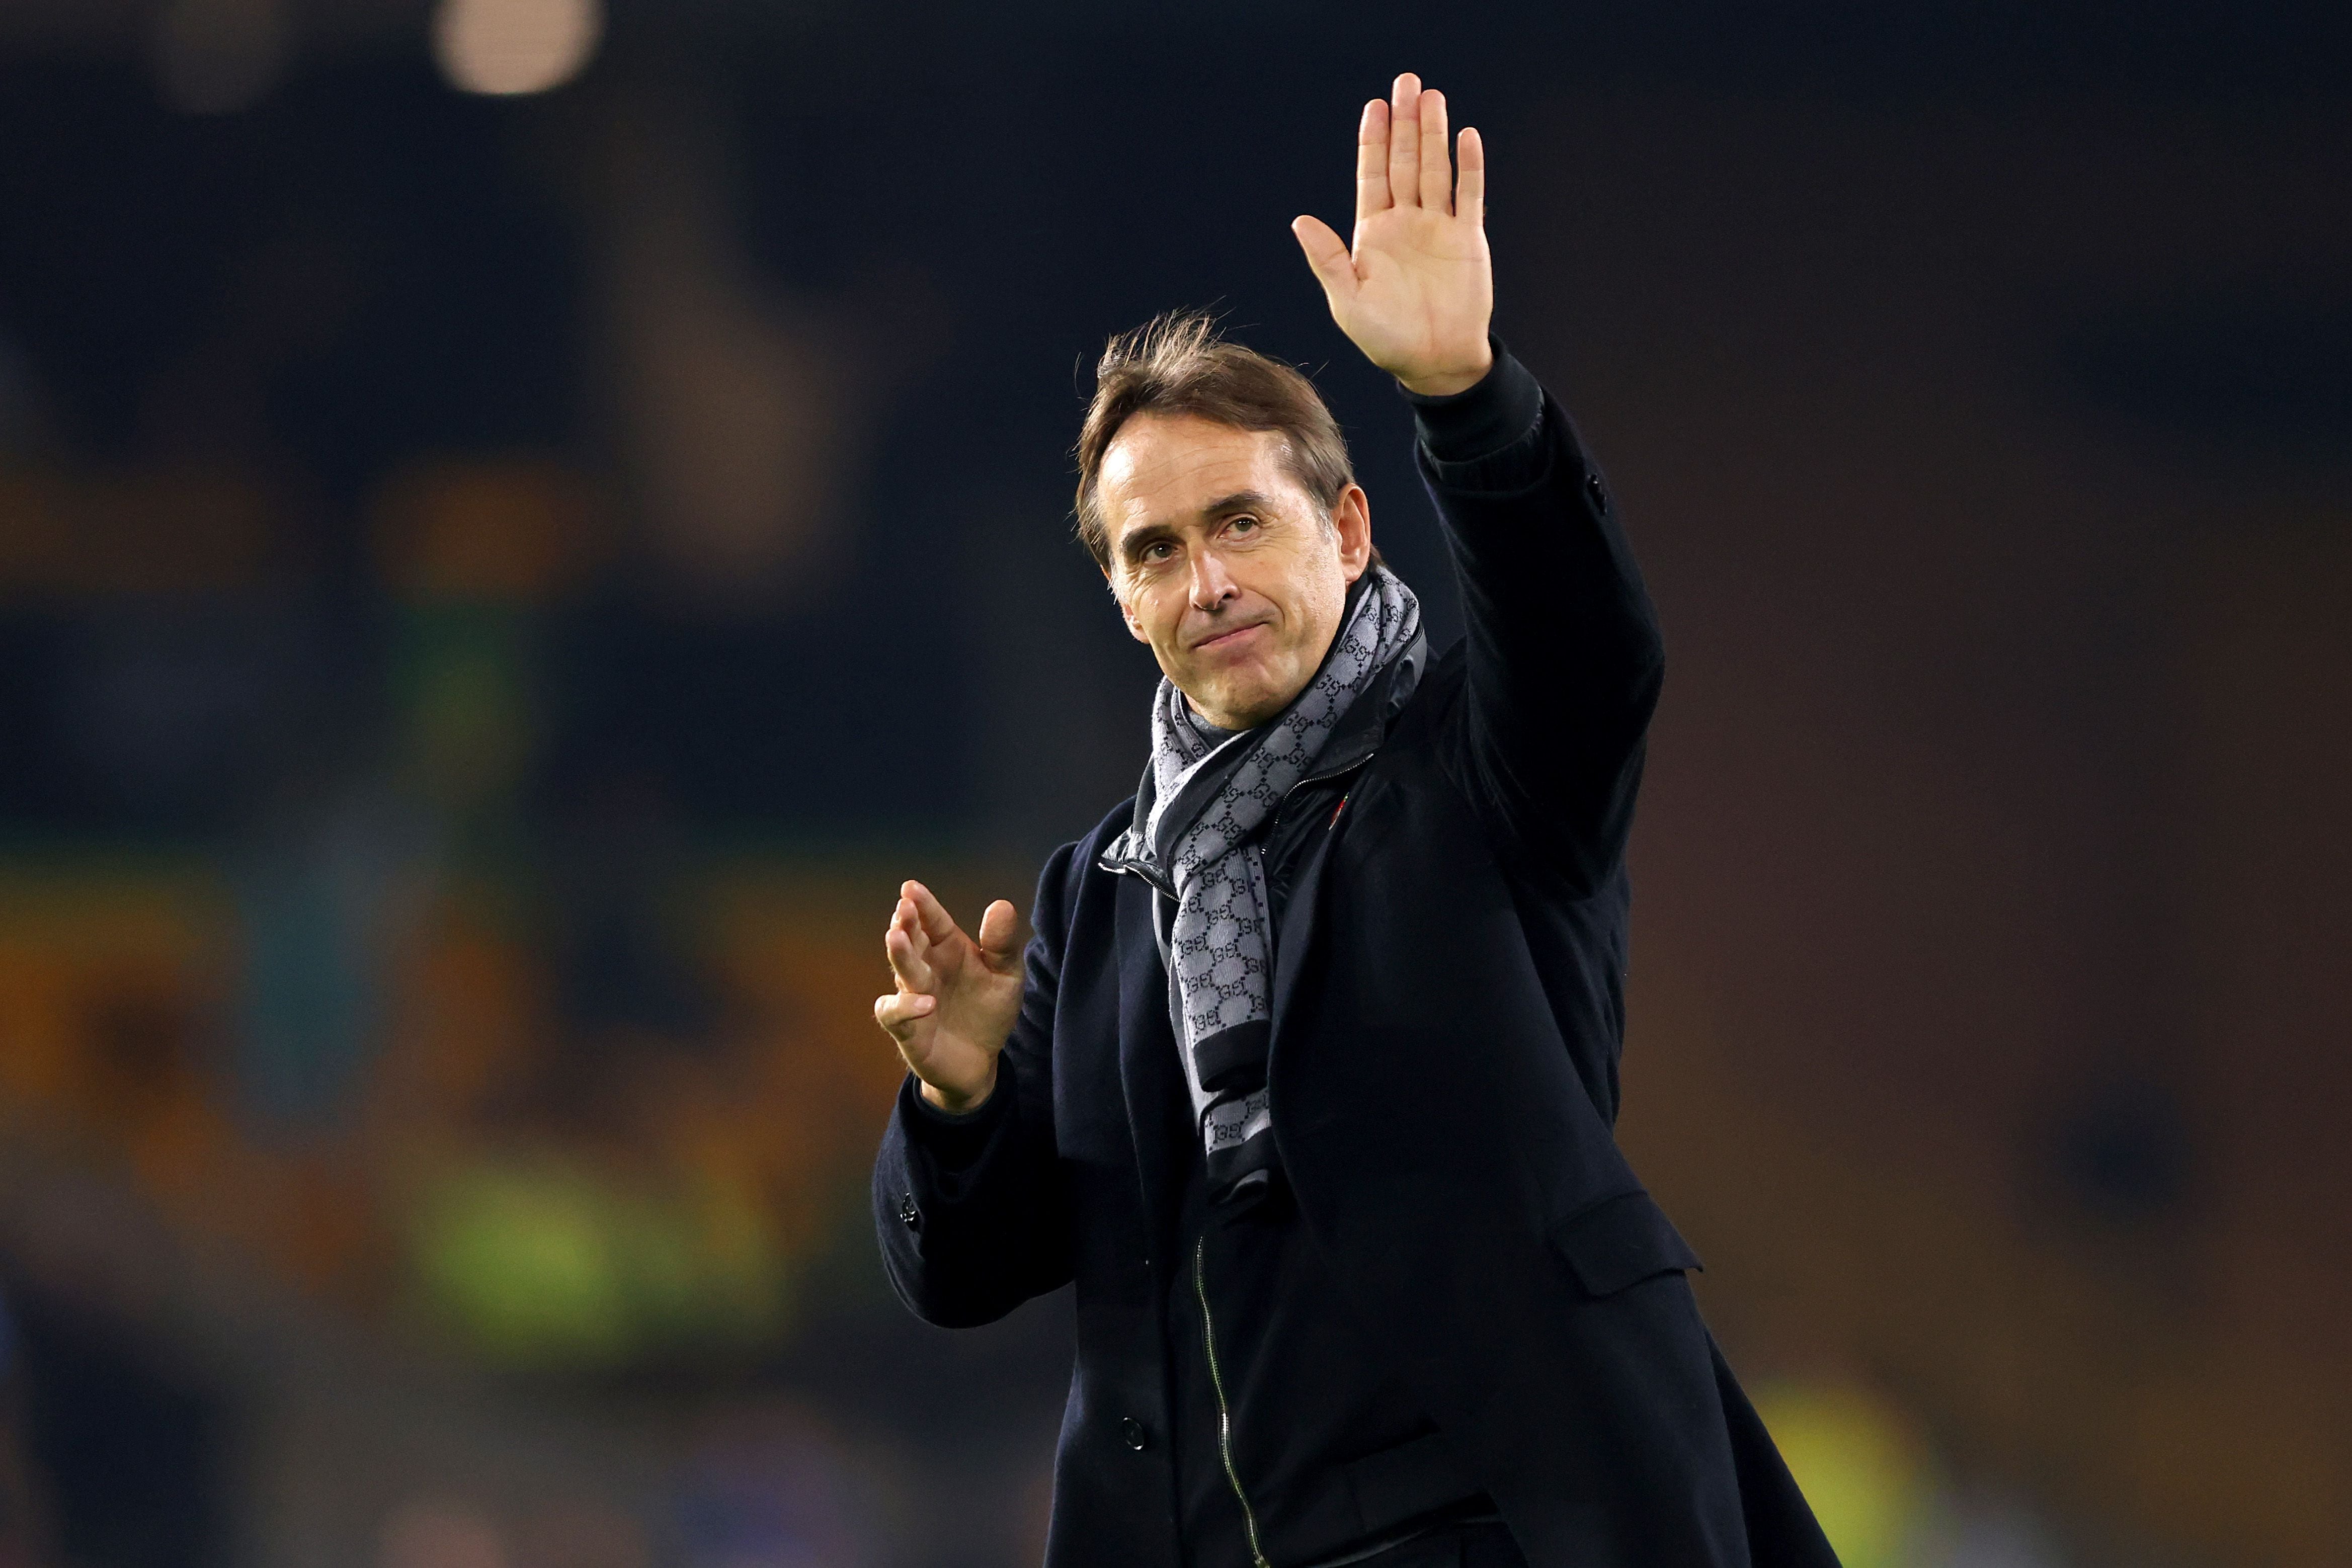 WOLVERHAMPTON, ENGLAND - NOVEMBER 12: Newly appointed Wolverhampton Wanderers manager, Julen Lopetegui acknowledges the fans prior to the Premier League match between Wolverhampton Wanderers and Arsenal FC at Molineux on November 12, 2022 in Wolverhampton, England. (Photo by Marc Atkins/Getty Images)